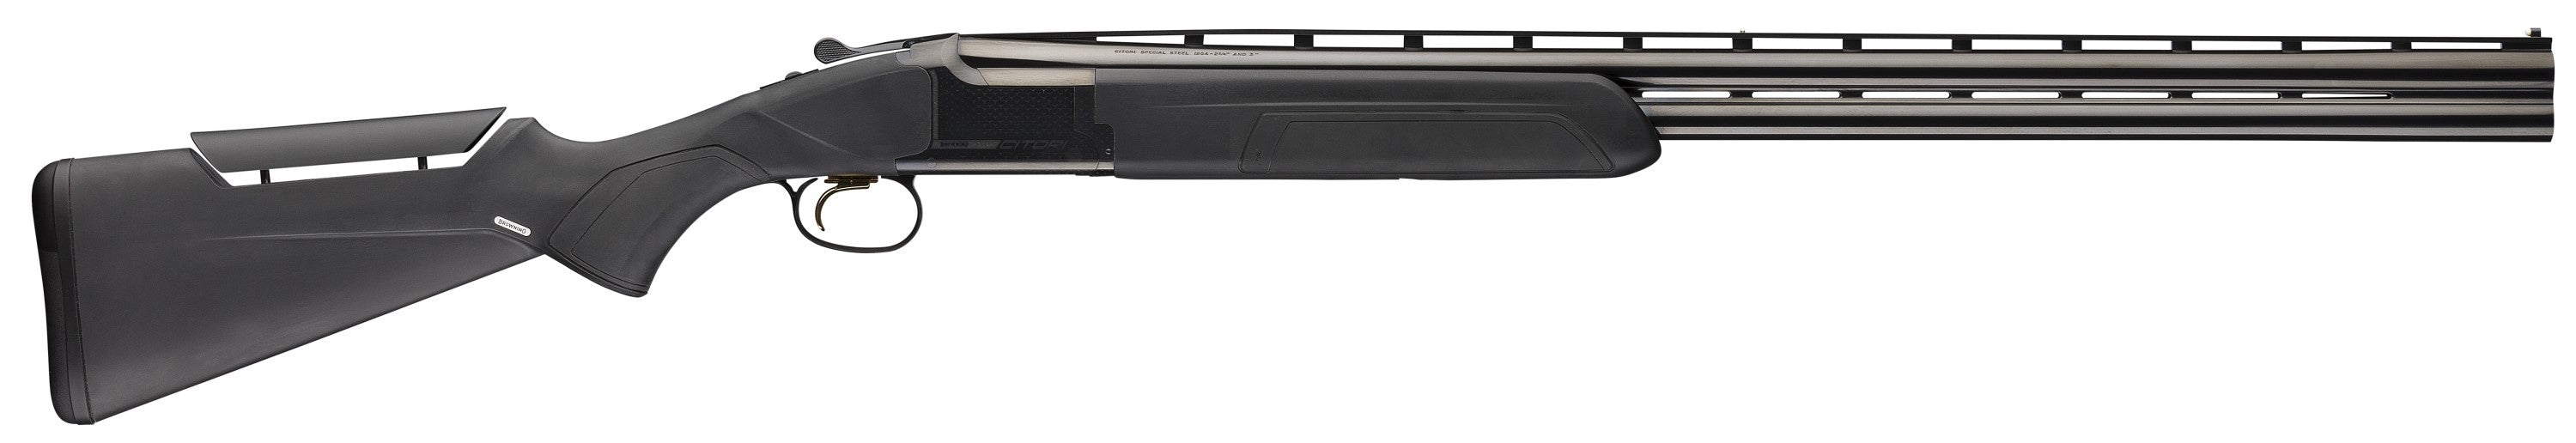 Browning Model Citori Composite